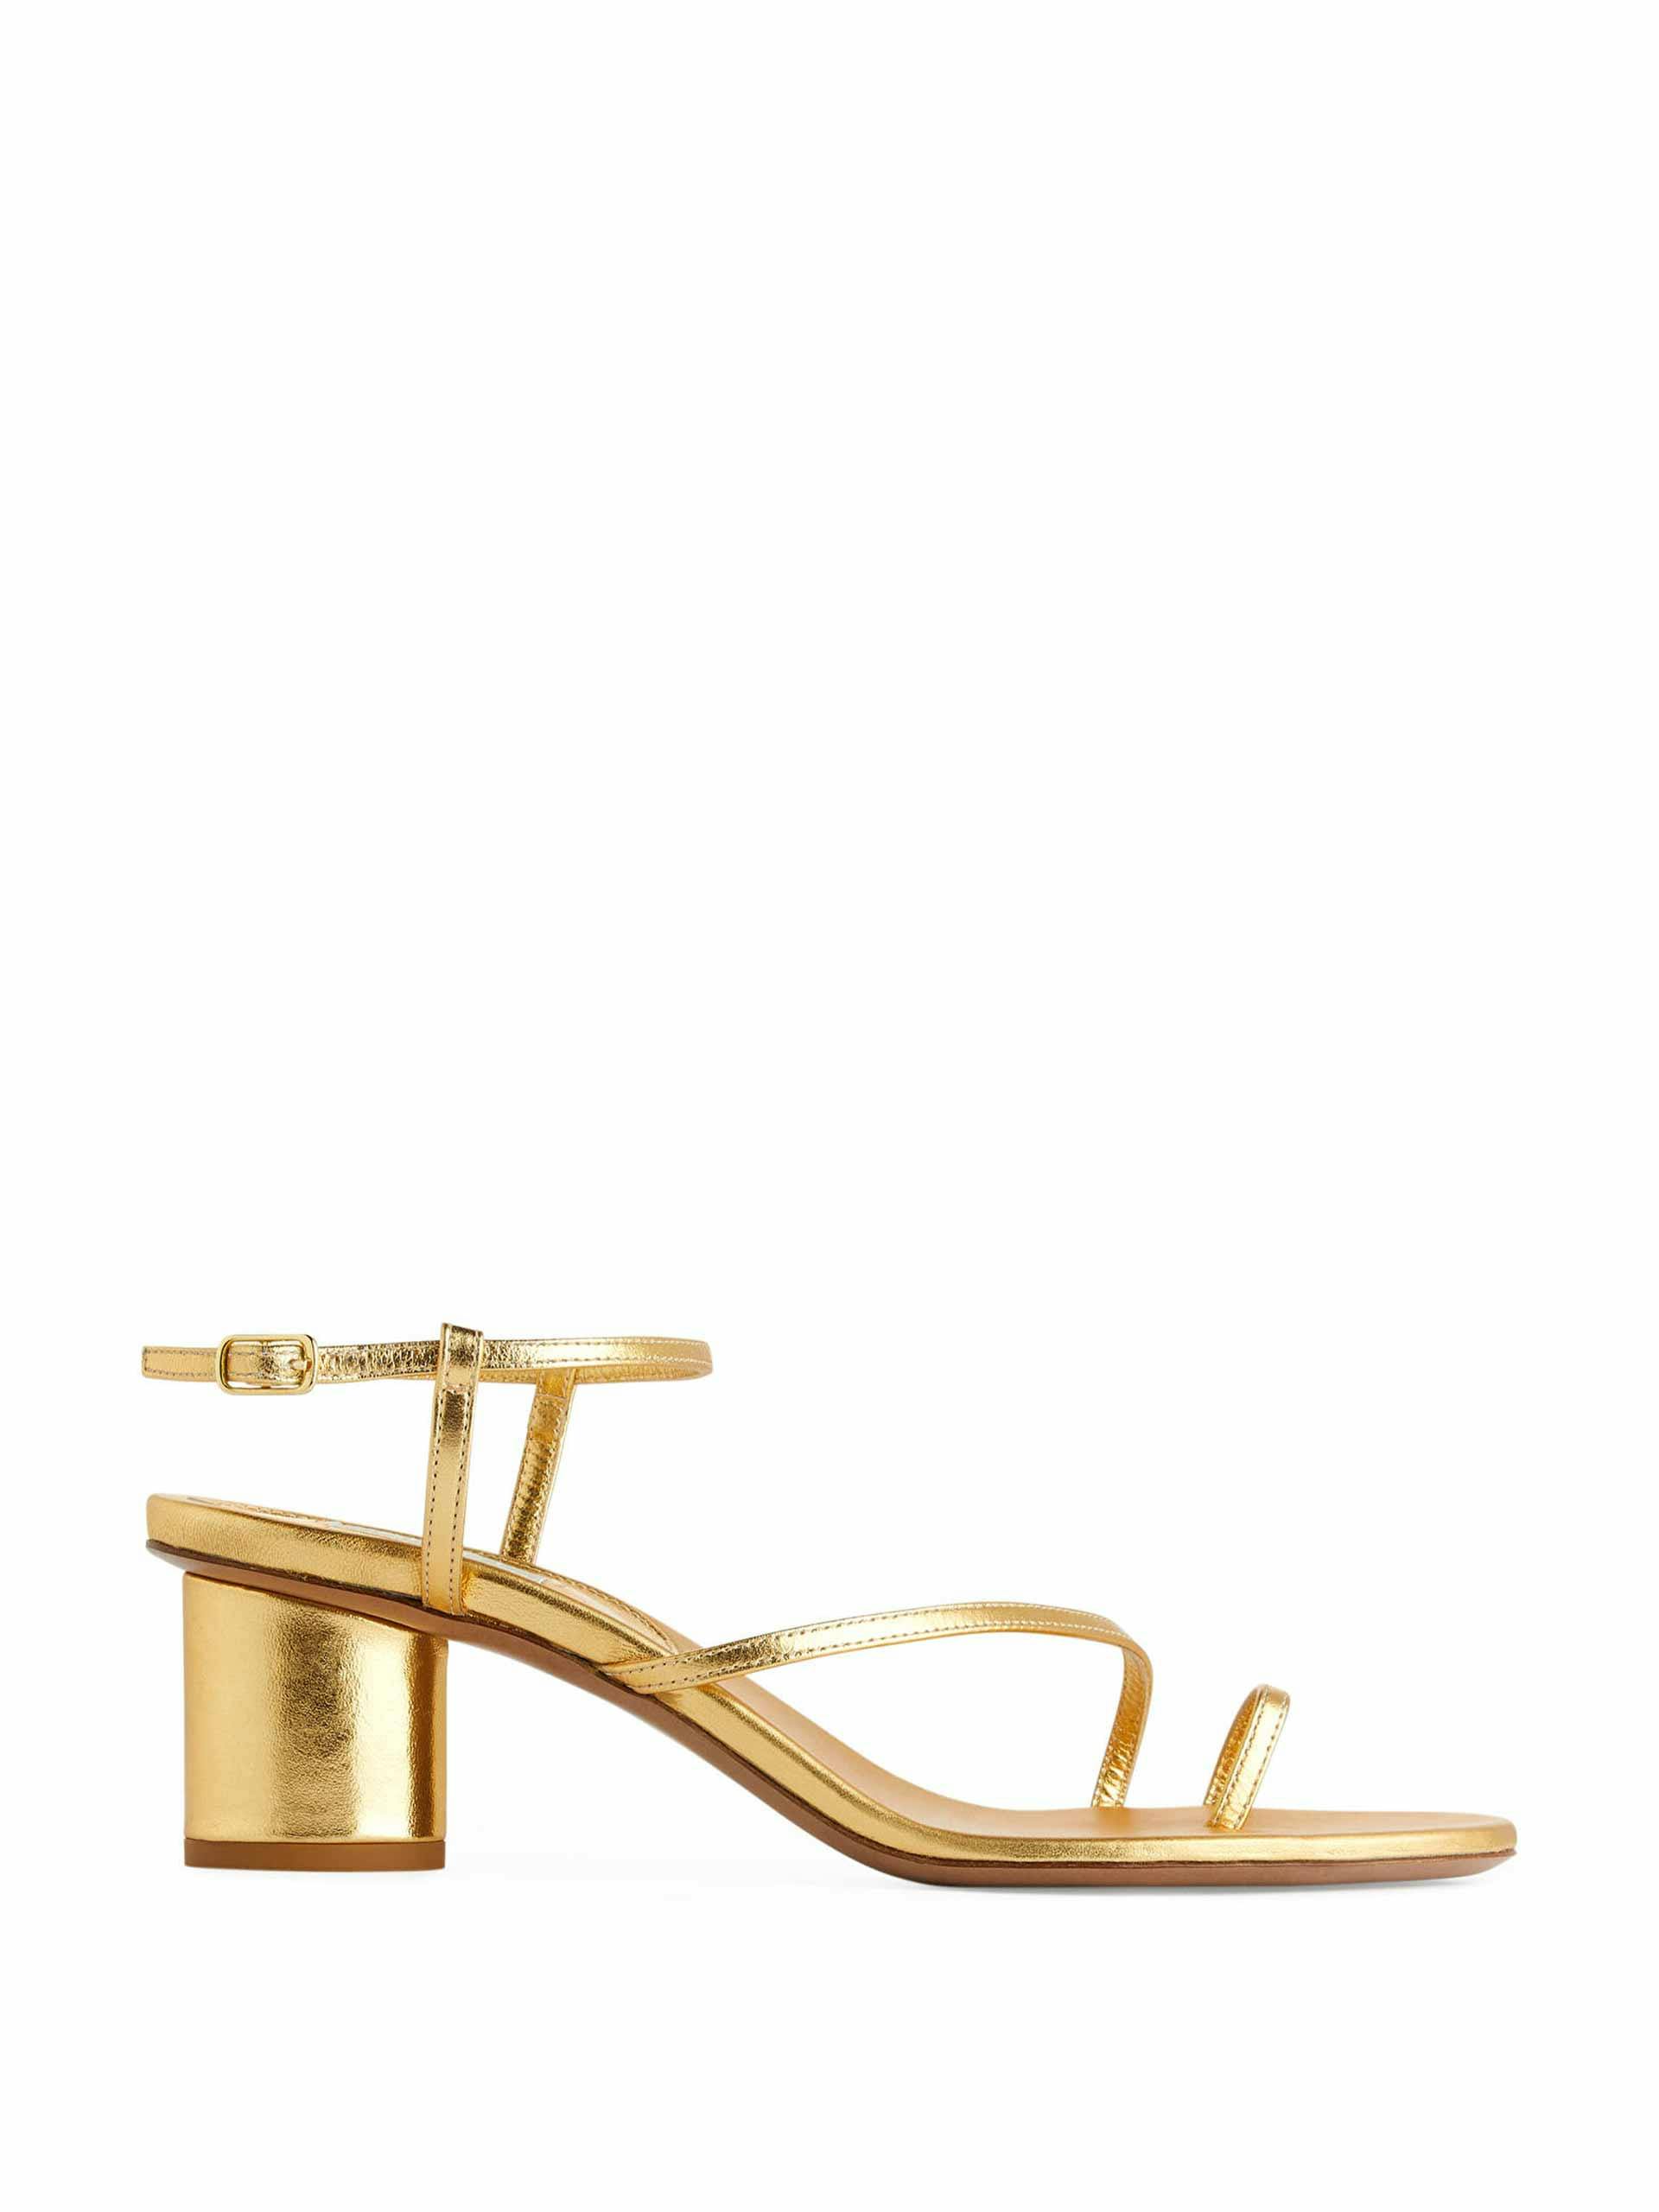 Gold heeled leather sandals